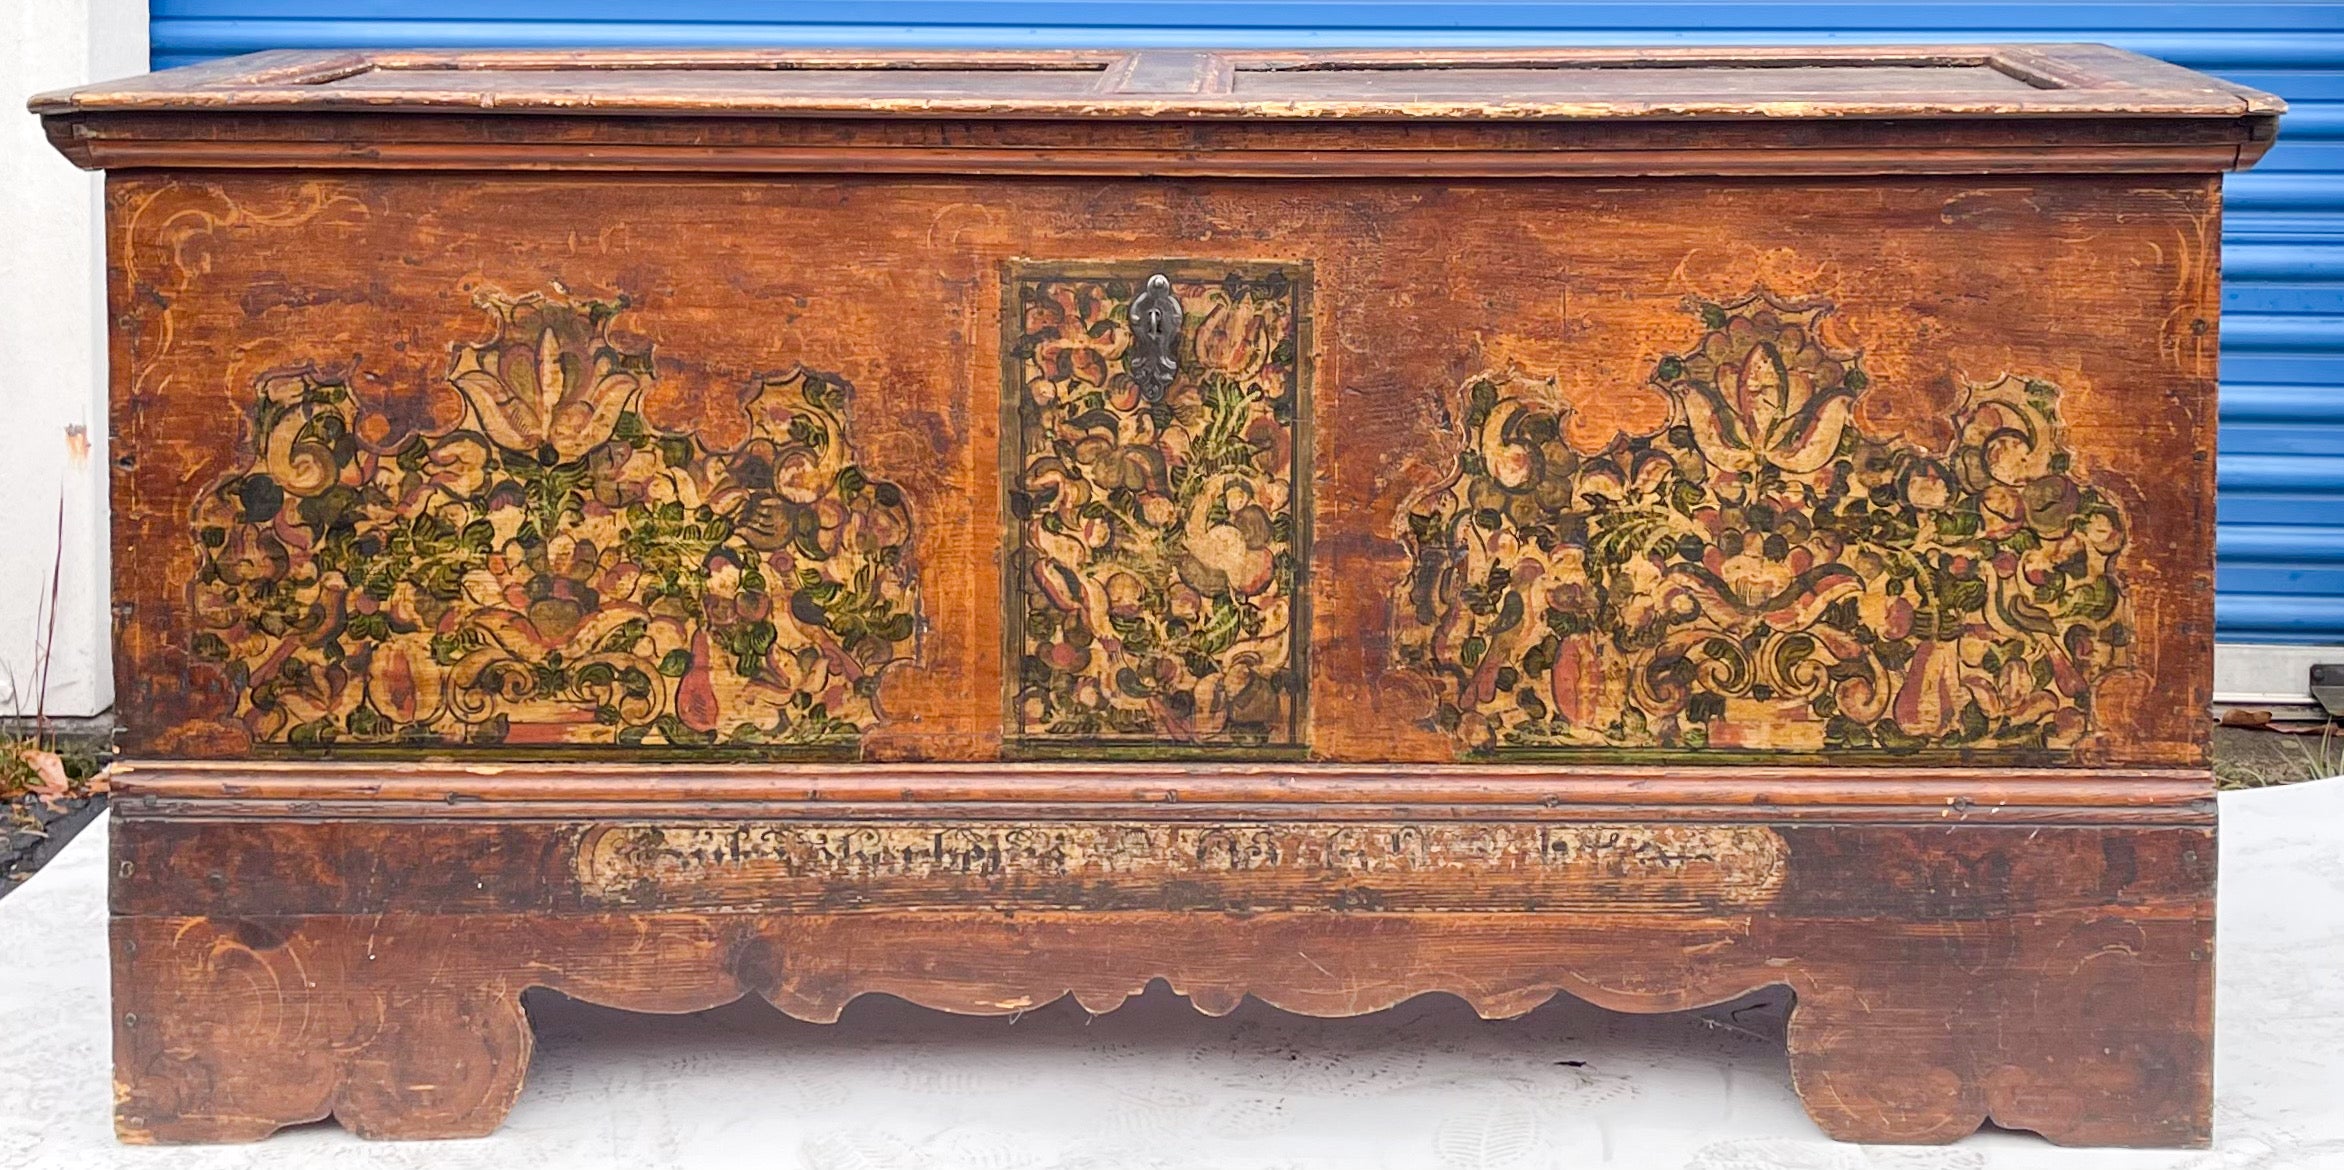 This is an exceptional piece! It is a large scale hand painted continental coffer or trunk. It could be Swedish in origin. Note hand forged hardware! It has early peg and dovetail construction as well. The painted details depict birds among a floral